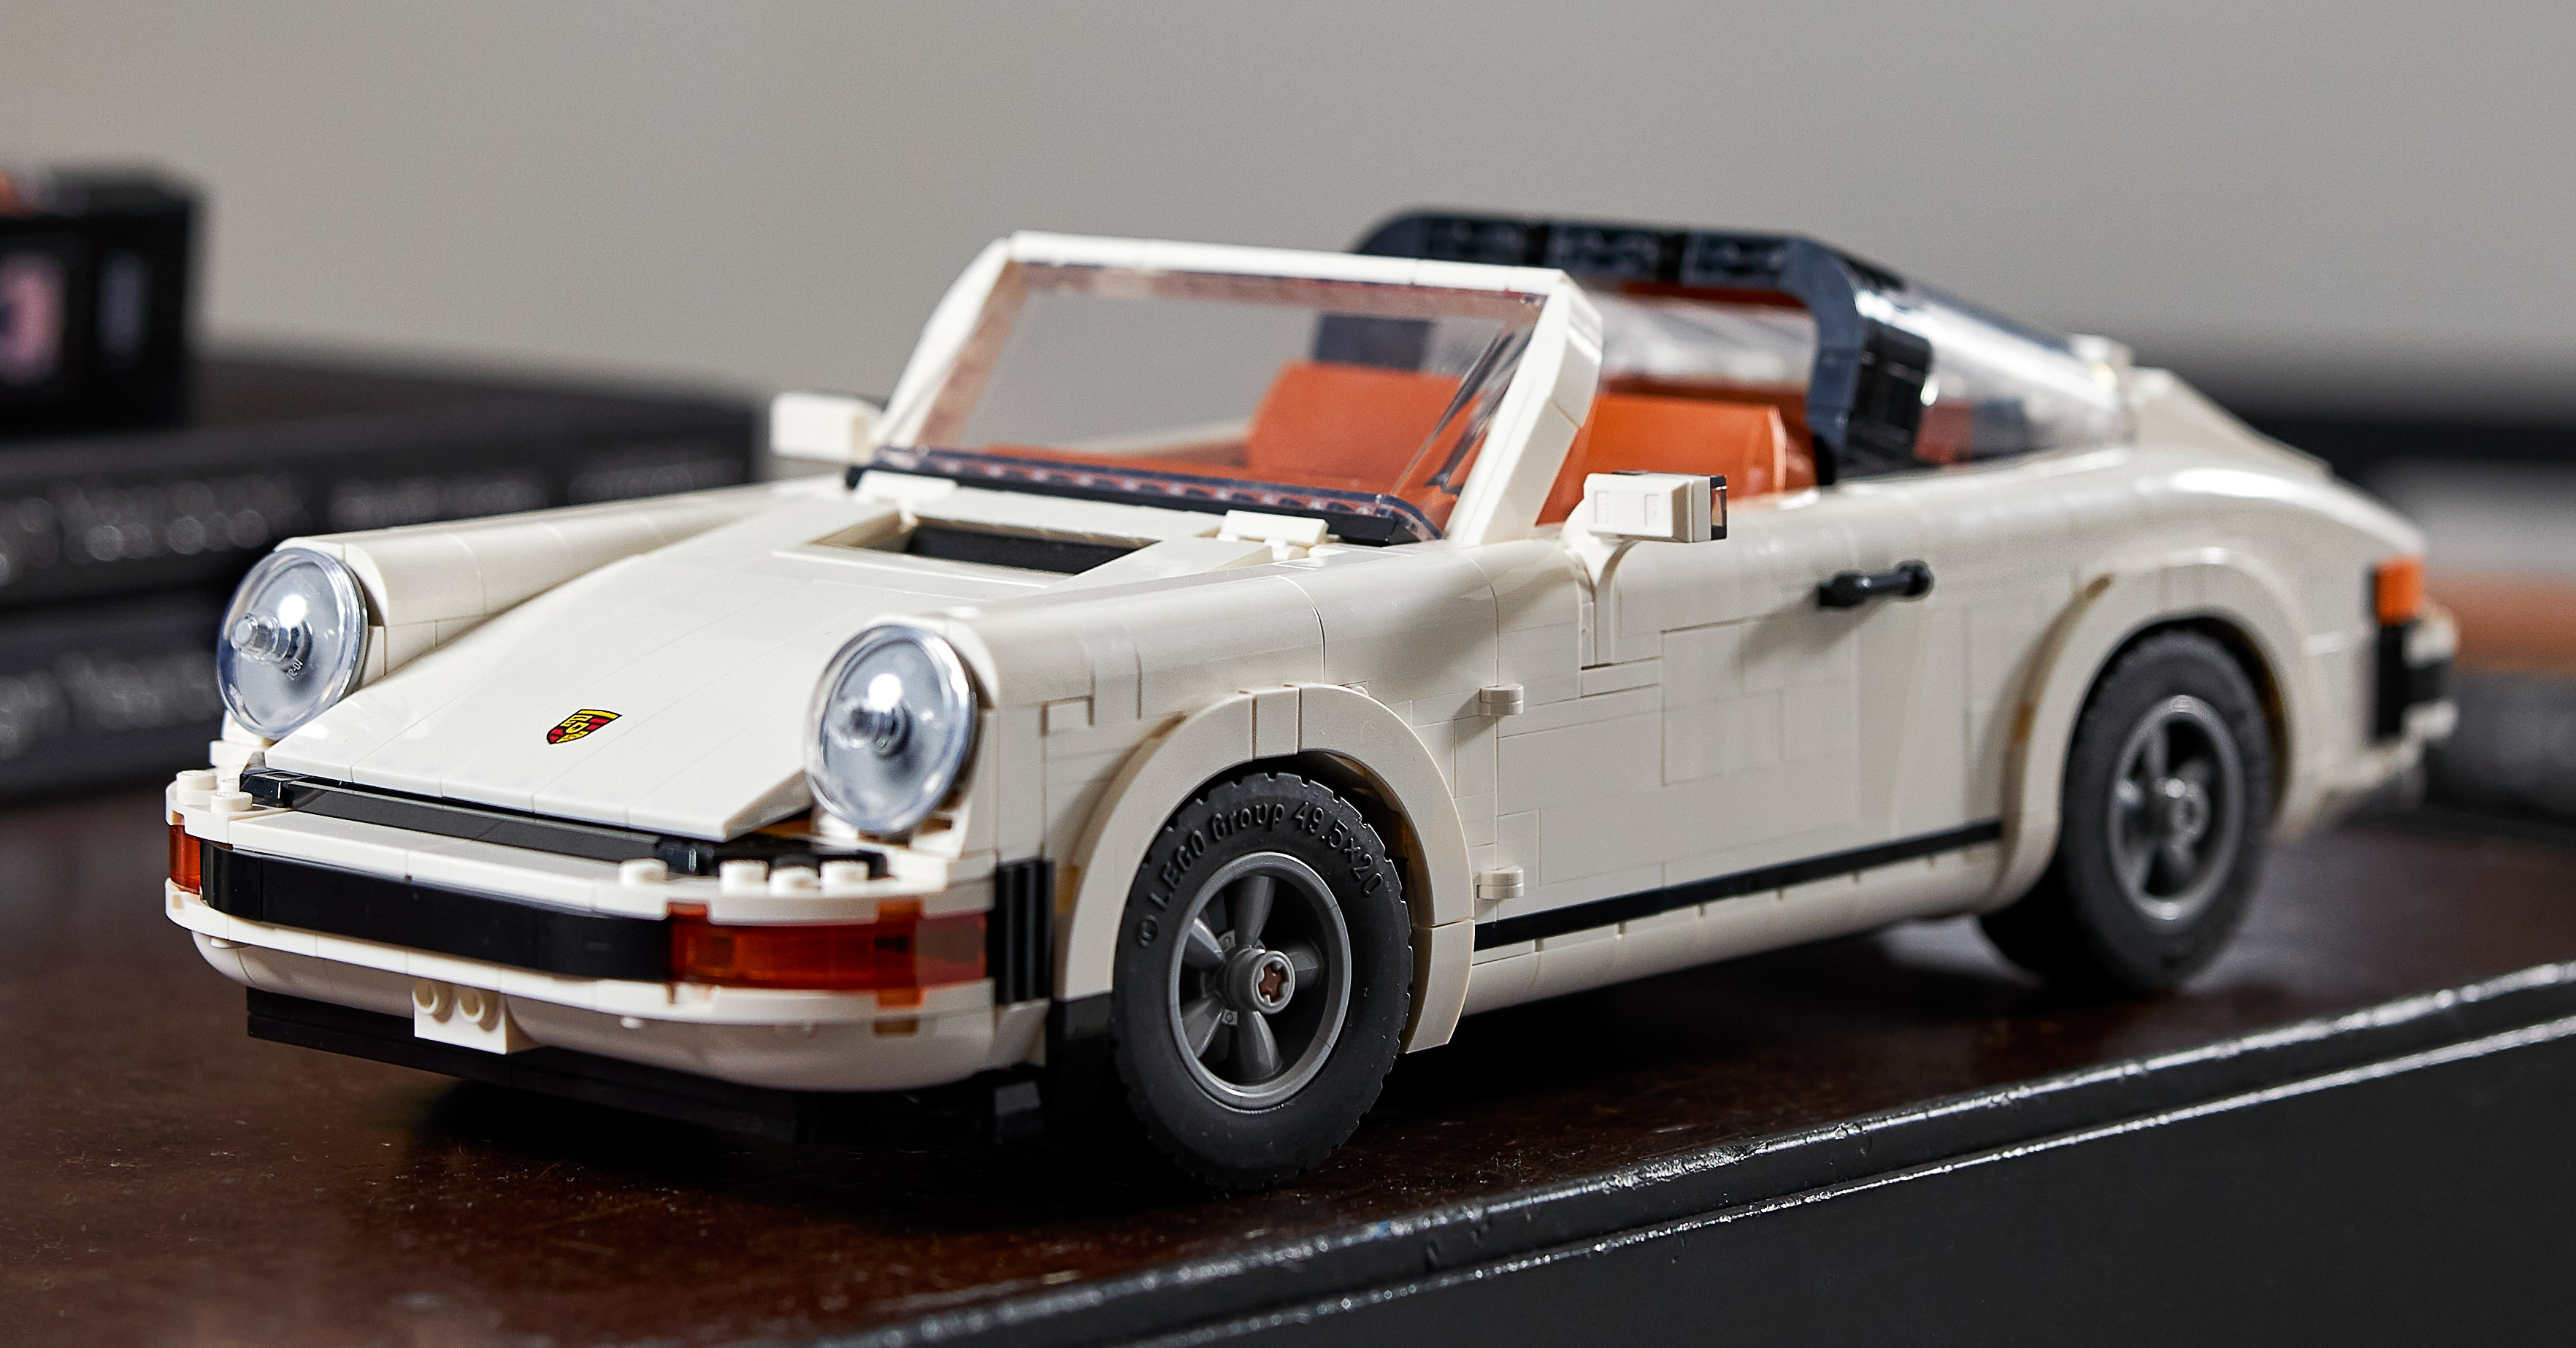 Lego reveals new two-in-one vintage Porsche 911 set - 1,458 pieces; on sale  from Feb 16 priced at RM608 